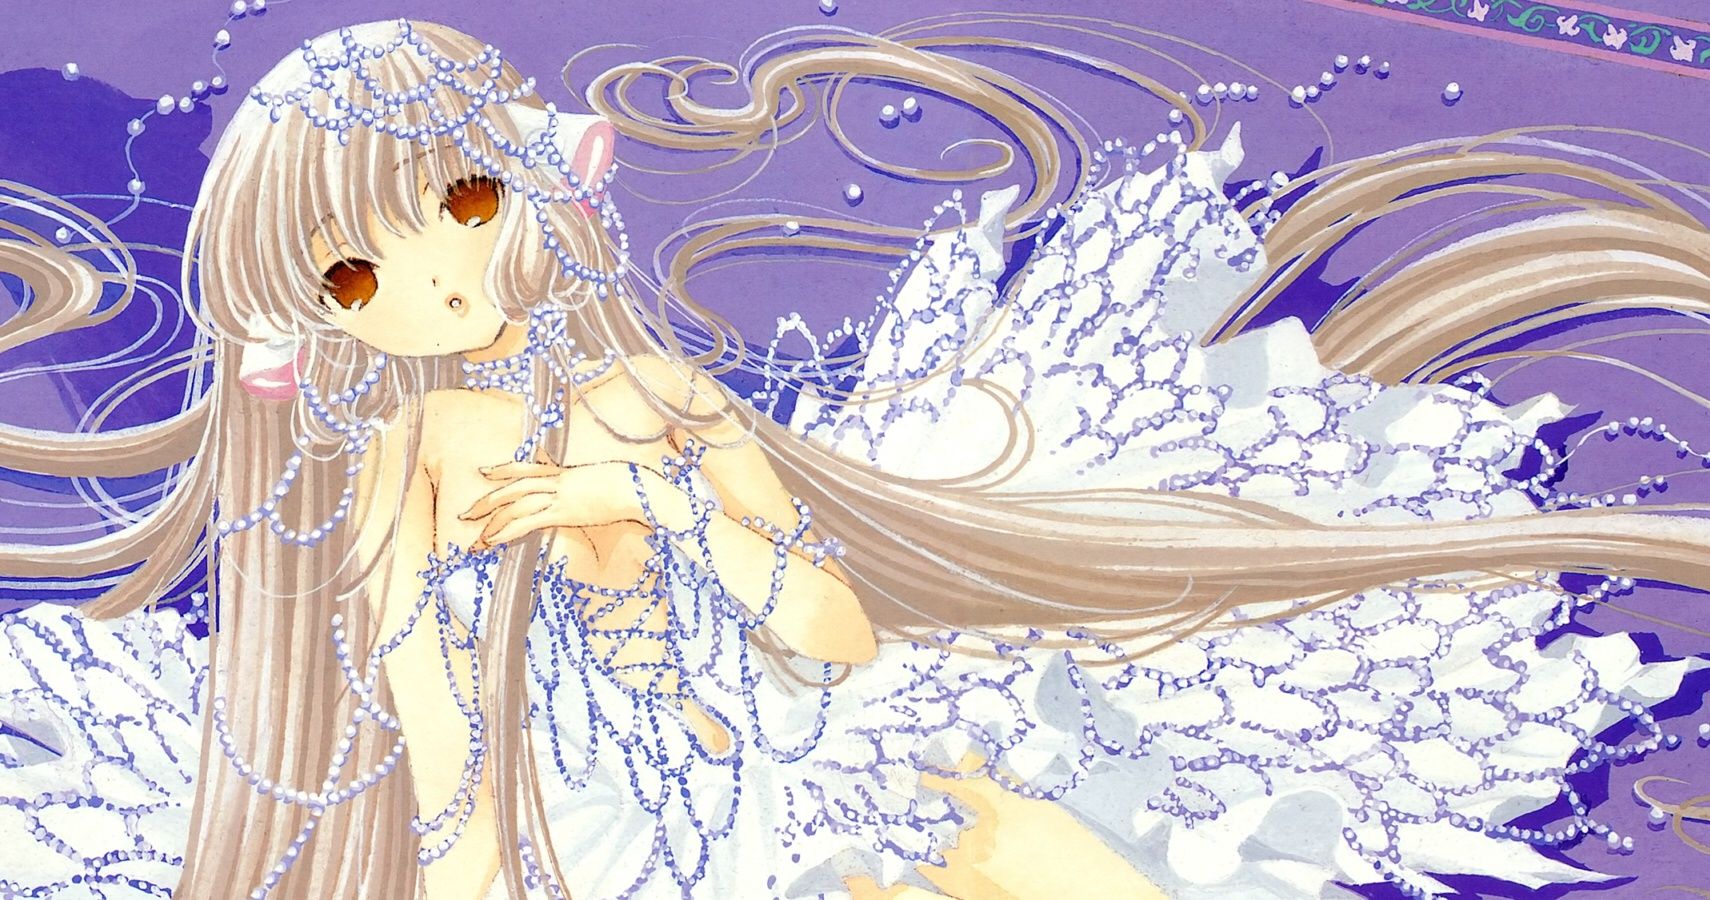 Chii from Chobits in a frilly dress, sitting and looking up